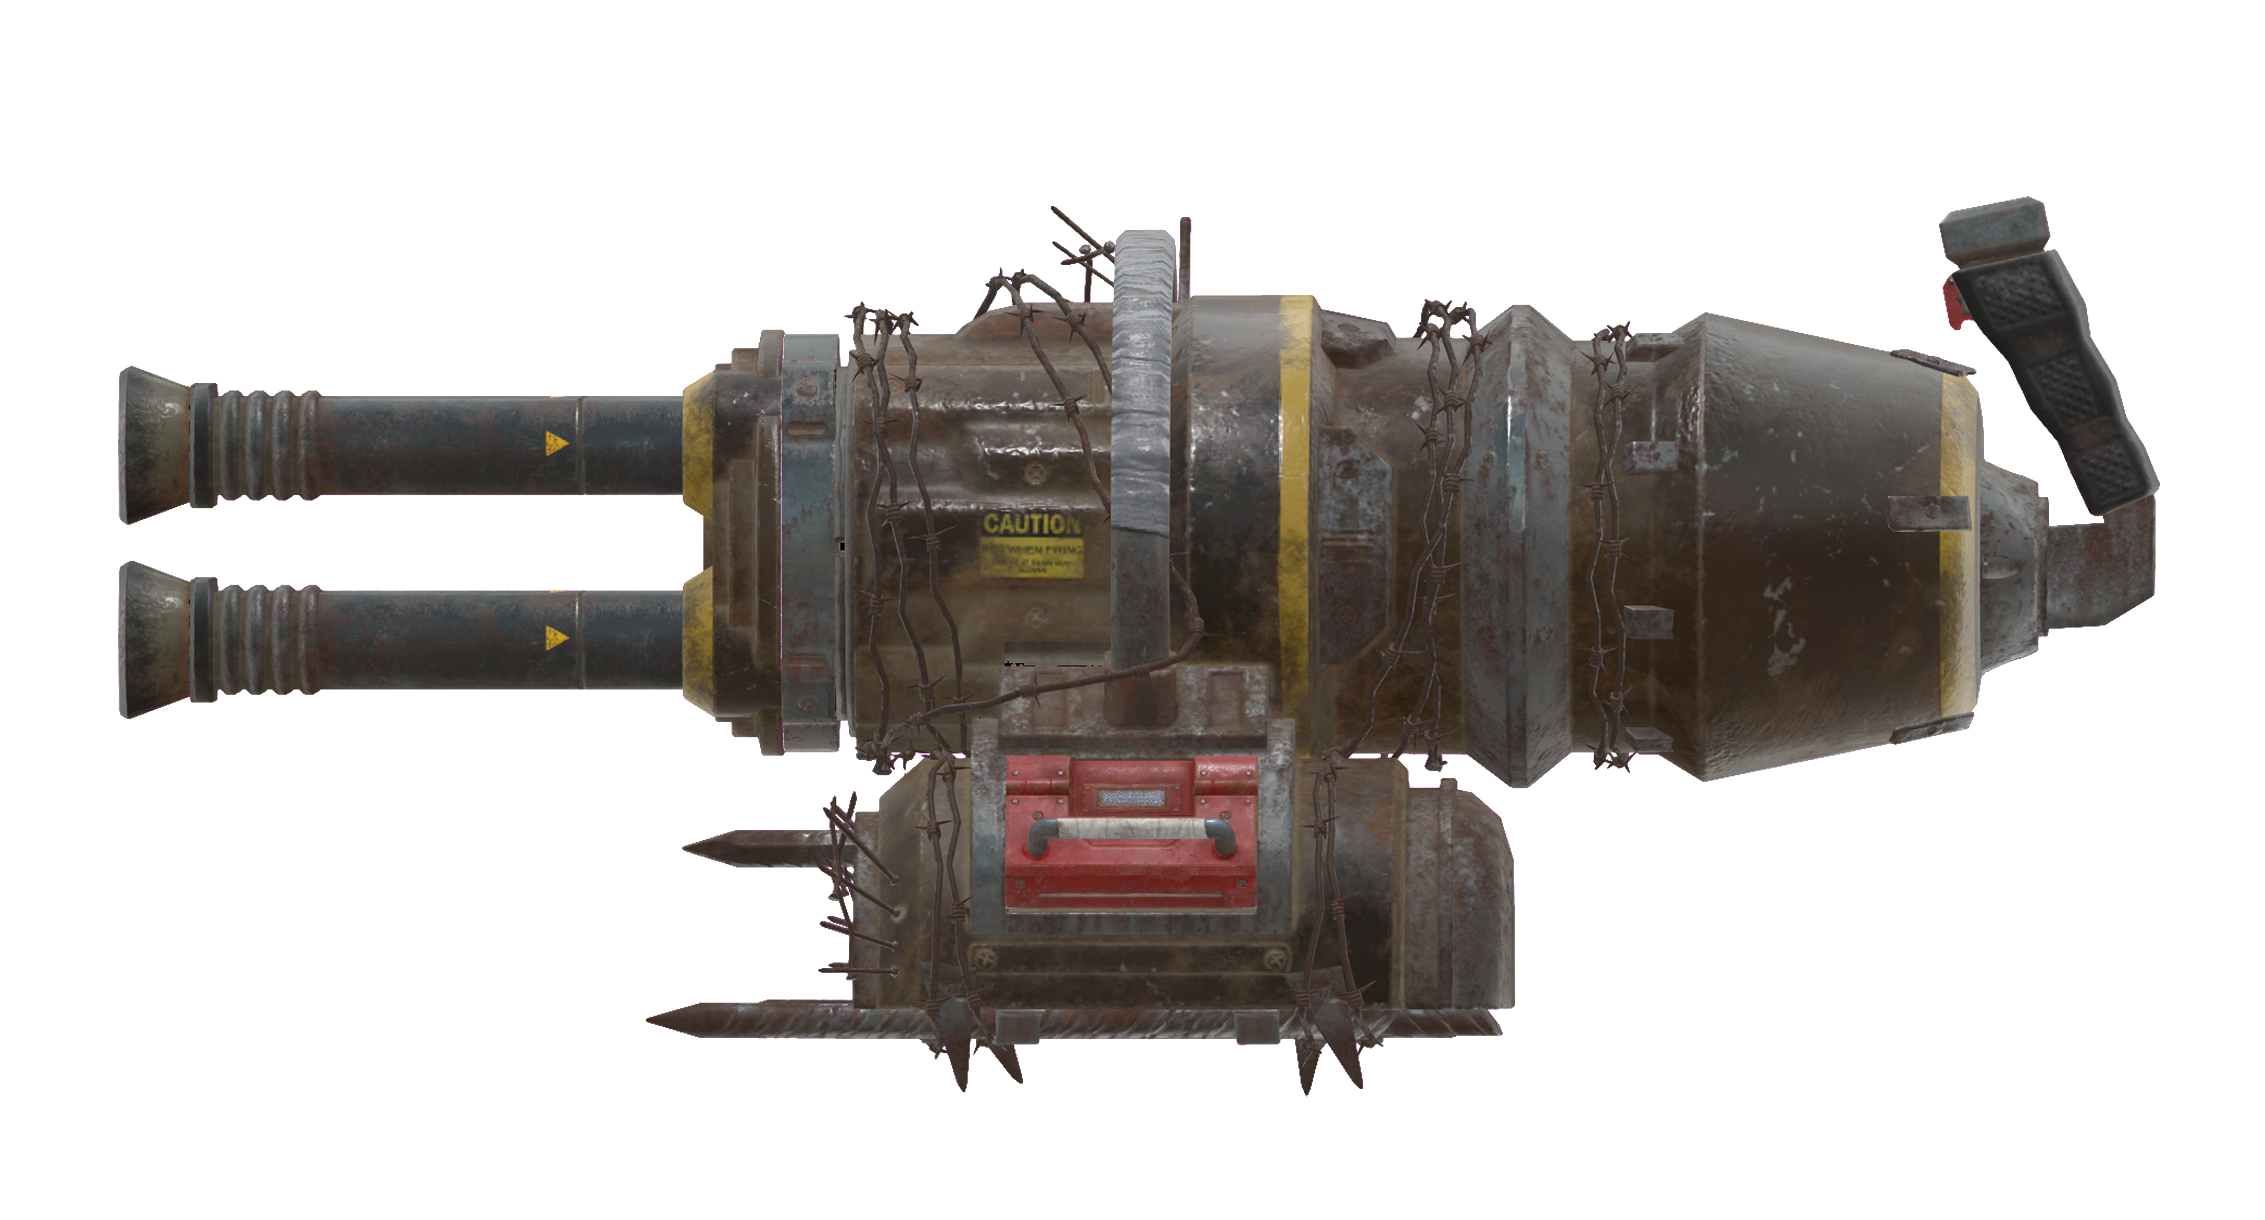 https://static.wikia.nocookie.net/fallout/images/f/f9/F76SR_Pepper_Shaker.png/revision/latest?cb=20210716214620